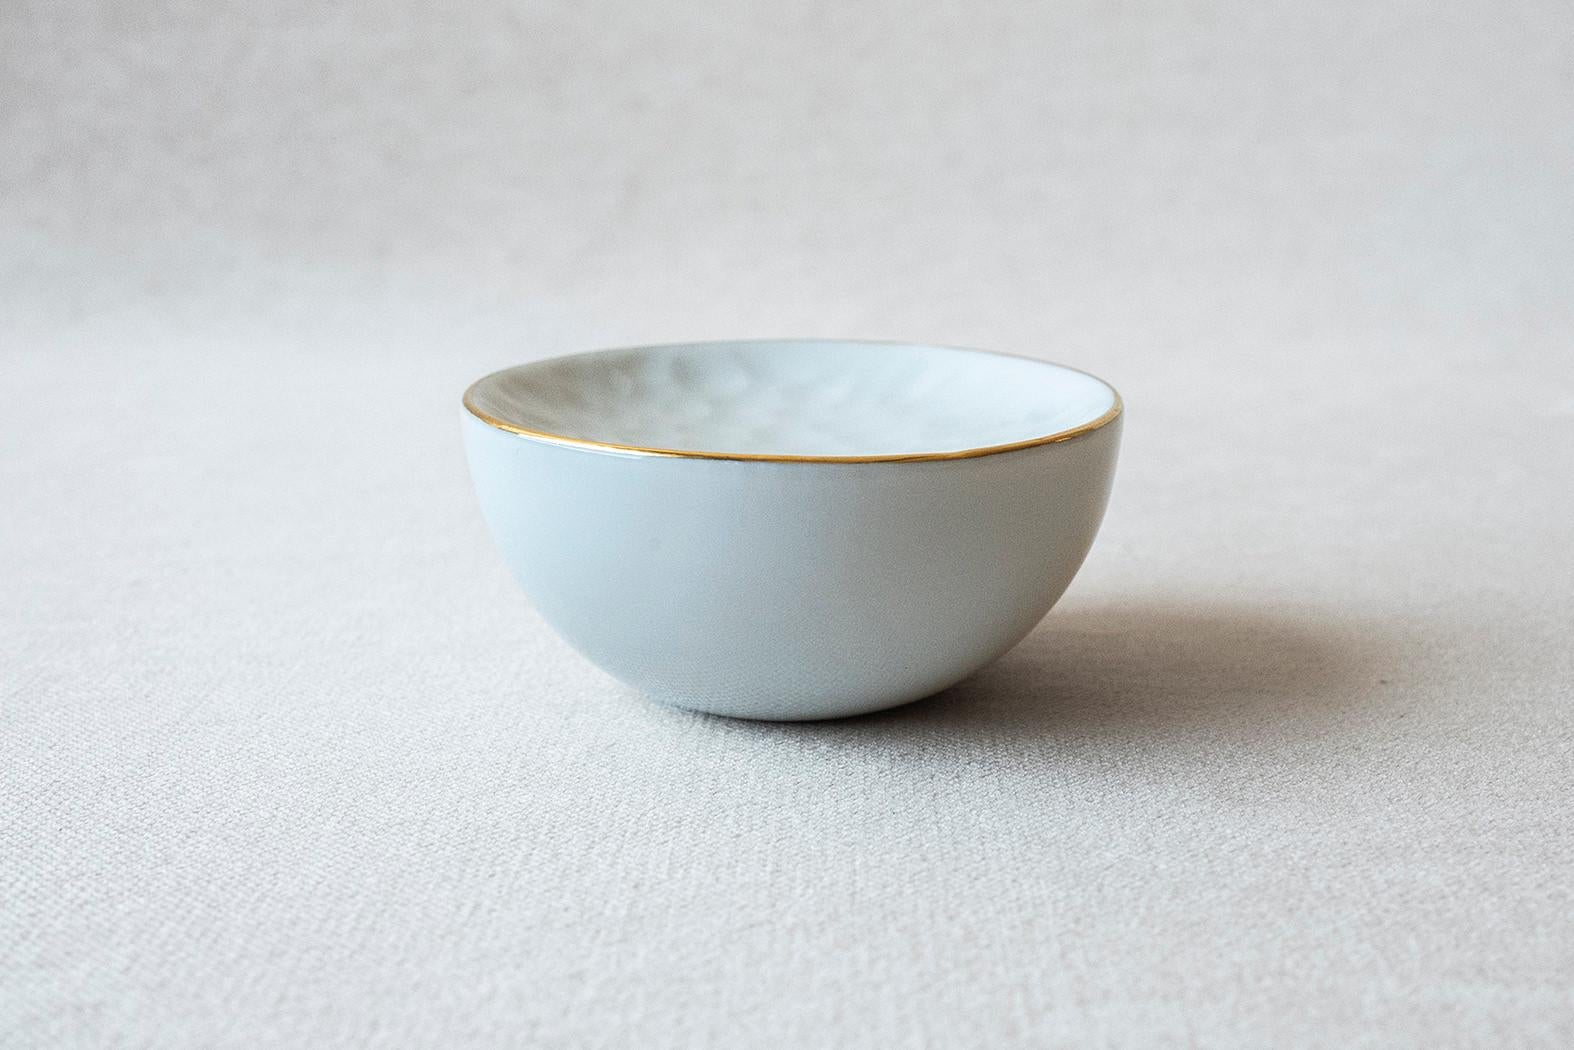 • small porcelain side dish
• 7,5 cm ø x 3,5 cm
• perfect for a sexy amuse-bouche, a pre-dessert or side dish
• also works for the essential coarse sea salt on the table
• glazed white with a textured top
• and a very luxurious 24k hand painted